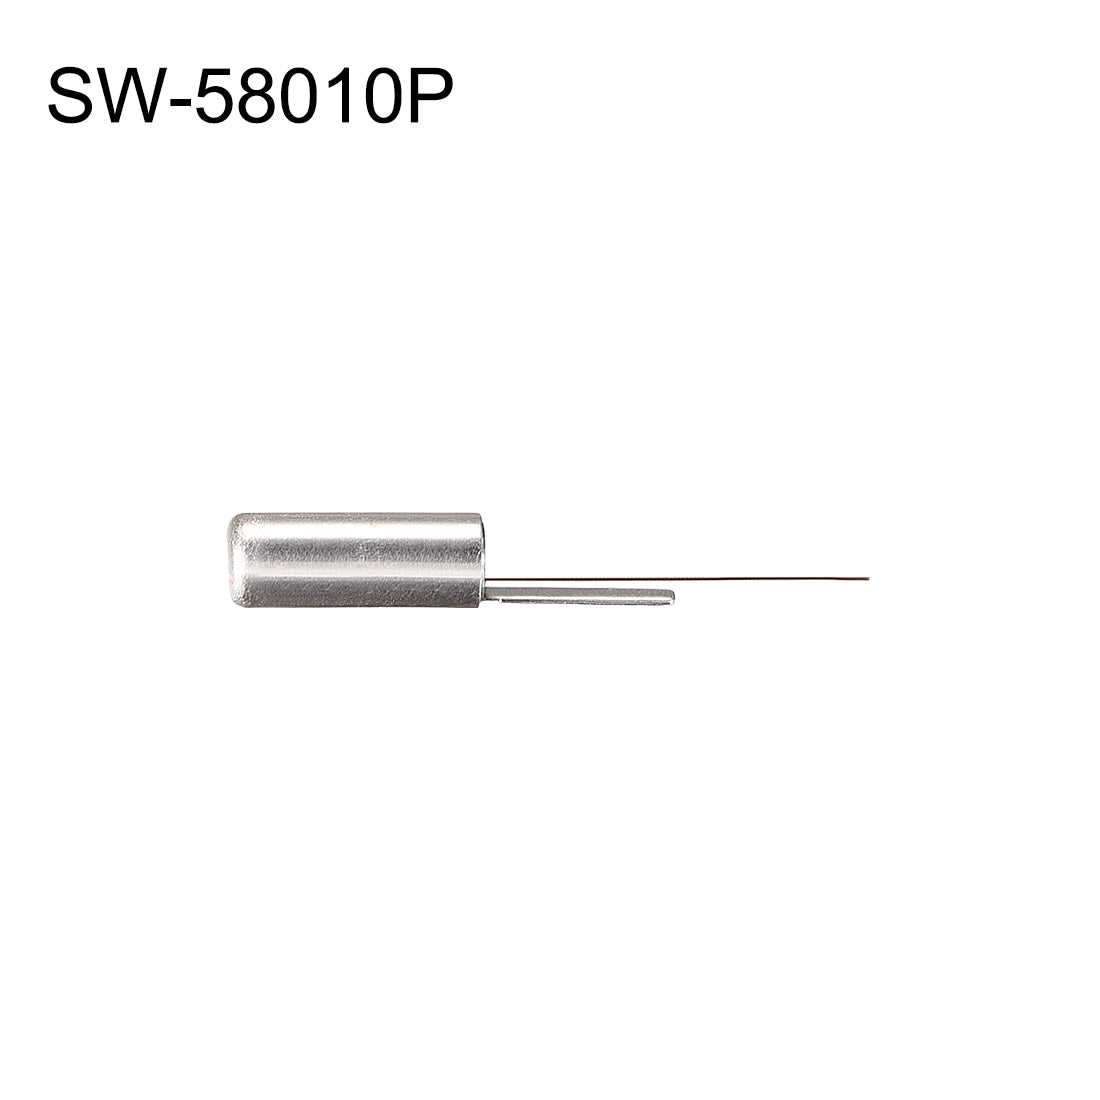 Uxcell Uxcell SW-58010P High Sensitivity Spring Electronic Vibration Sensor Switch Straight Pin 30Pcs